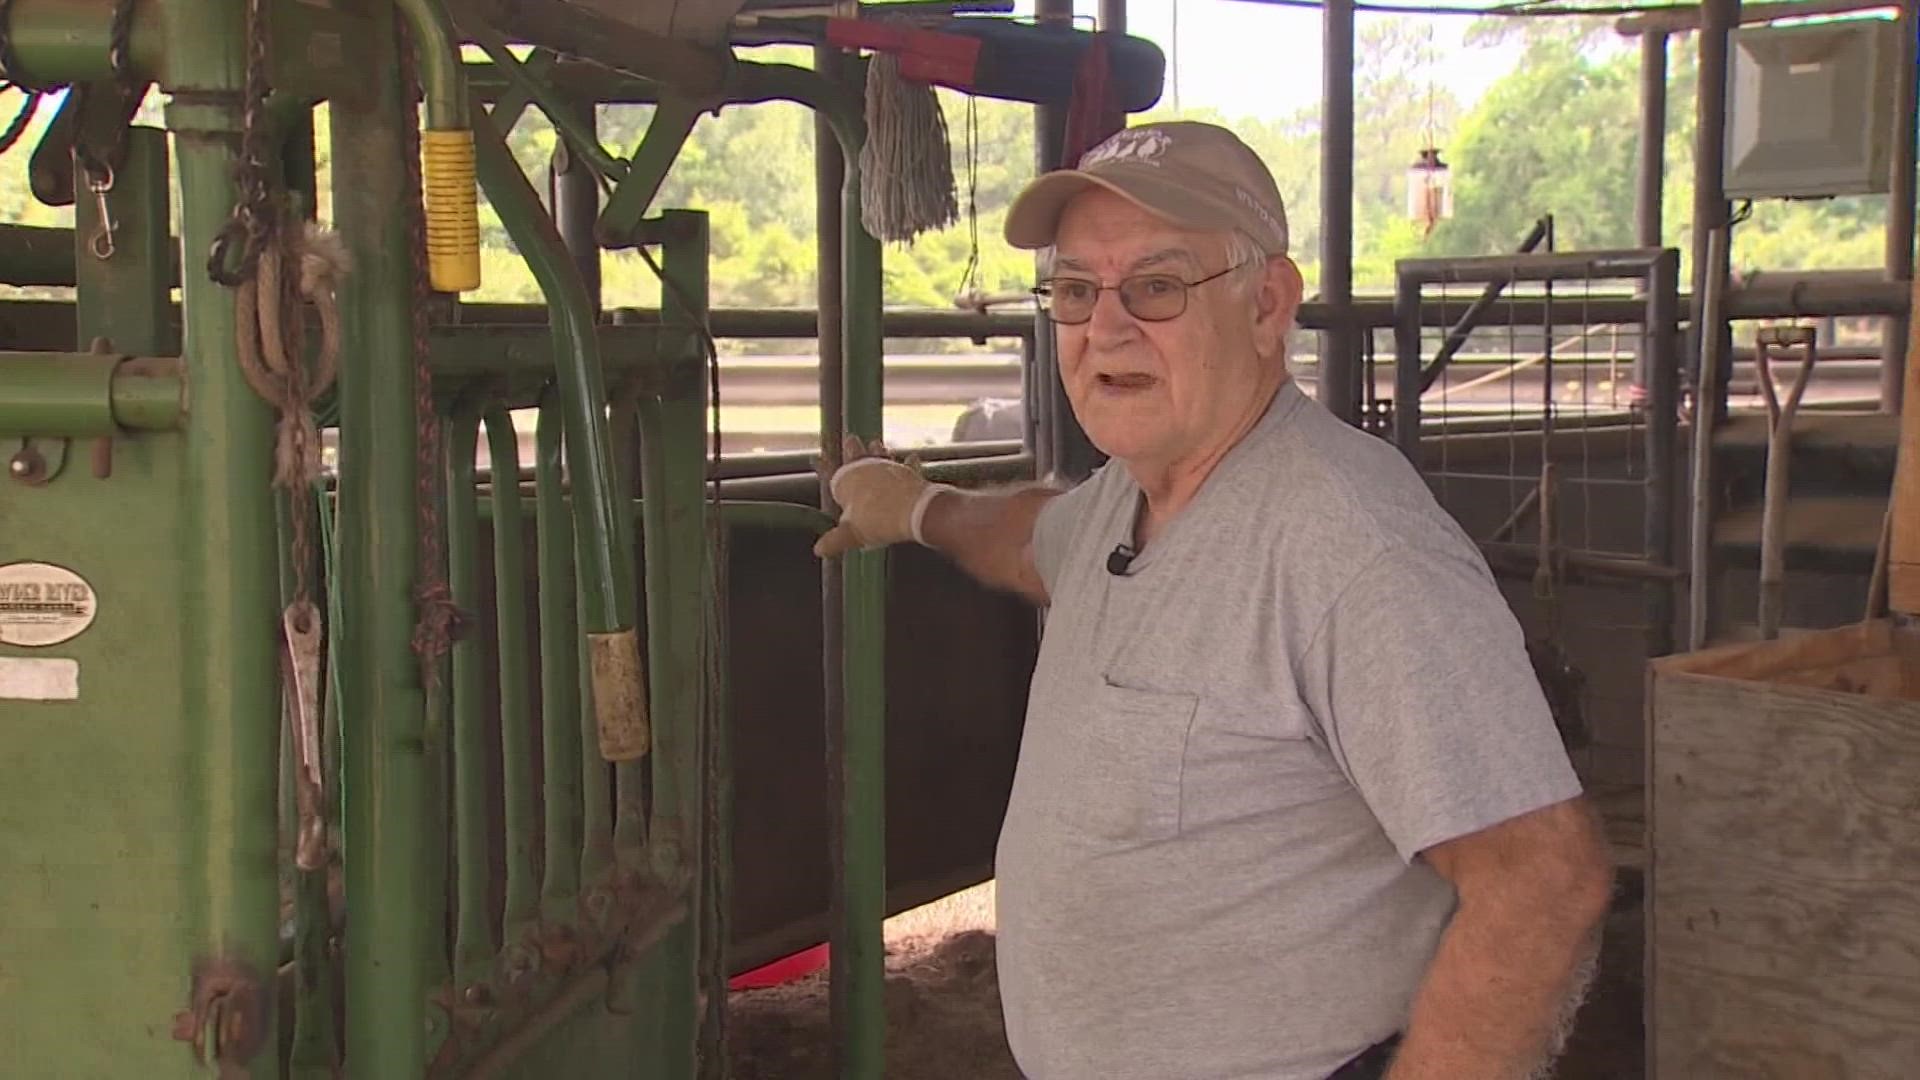 Sitting on some 60 acres in Tomball, Ranch Manager William "Bill" Roenfanz has been bailing hay and steering cattle at Cedar Brook Farms for nearly 40 years.